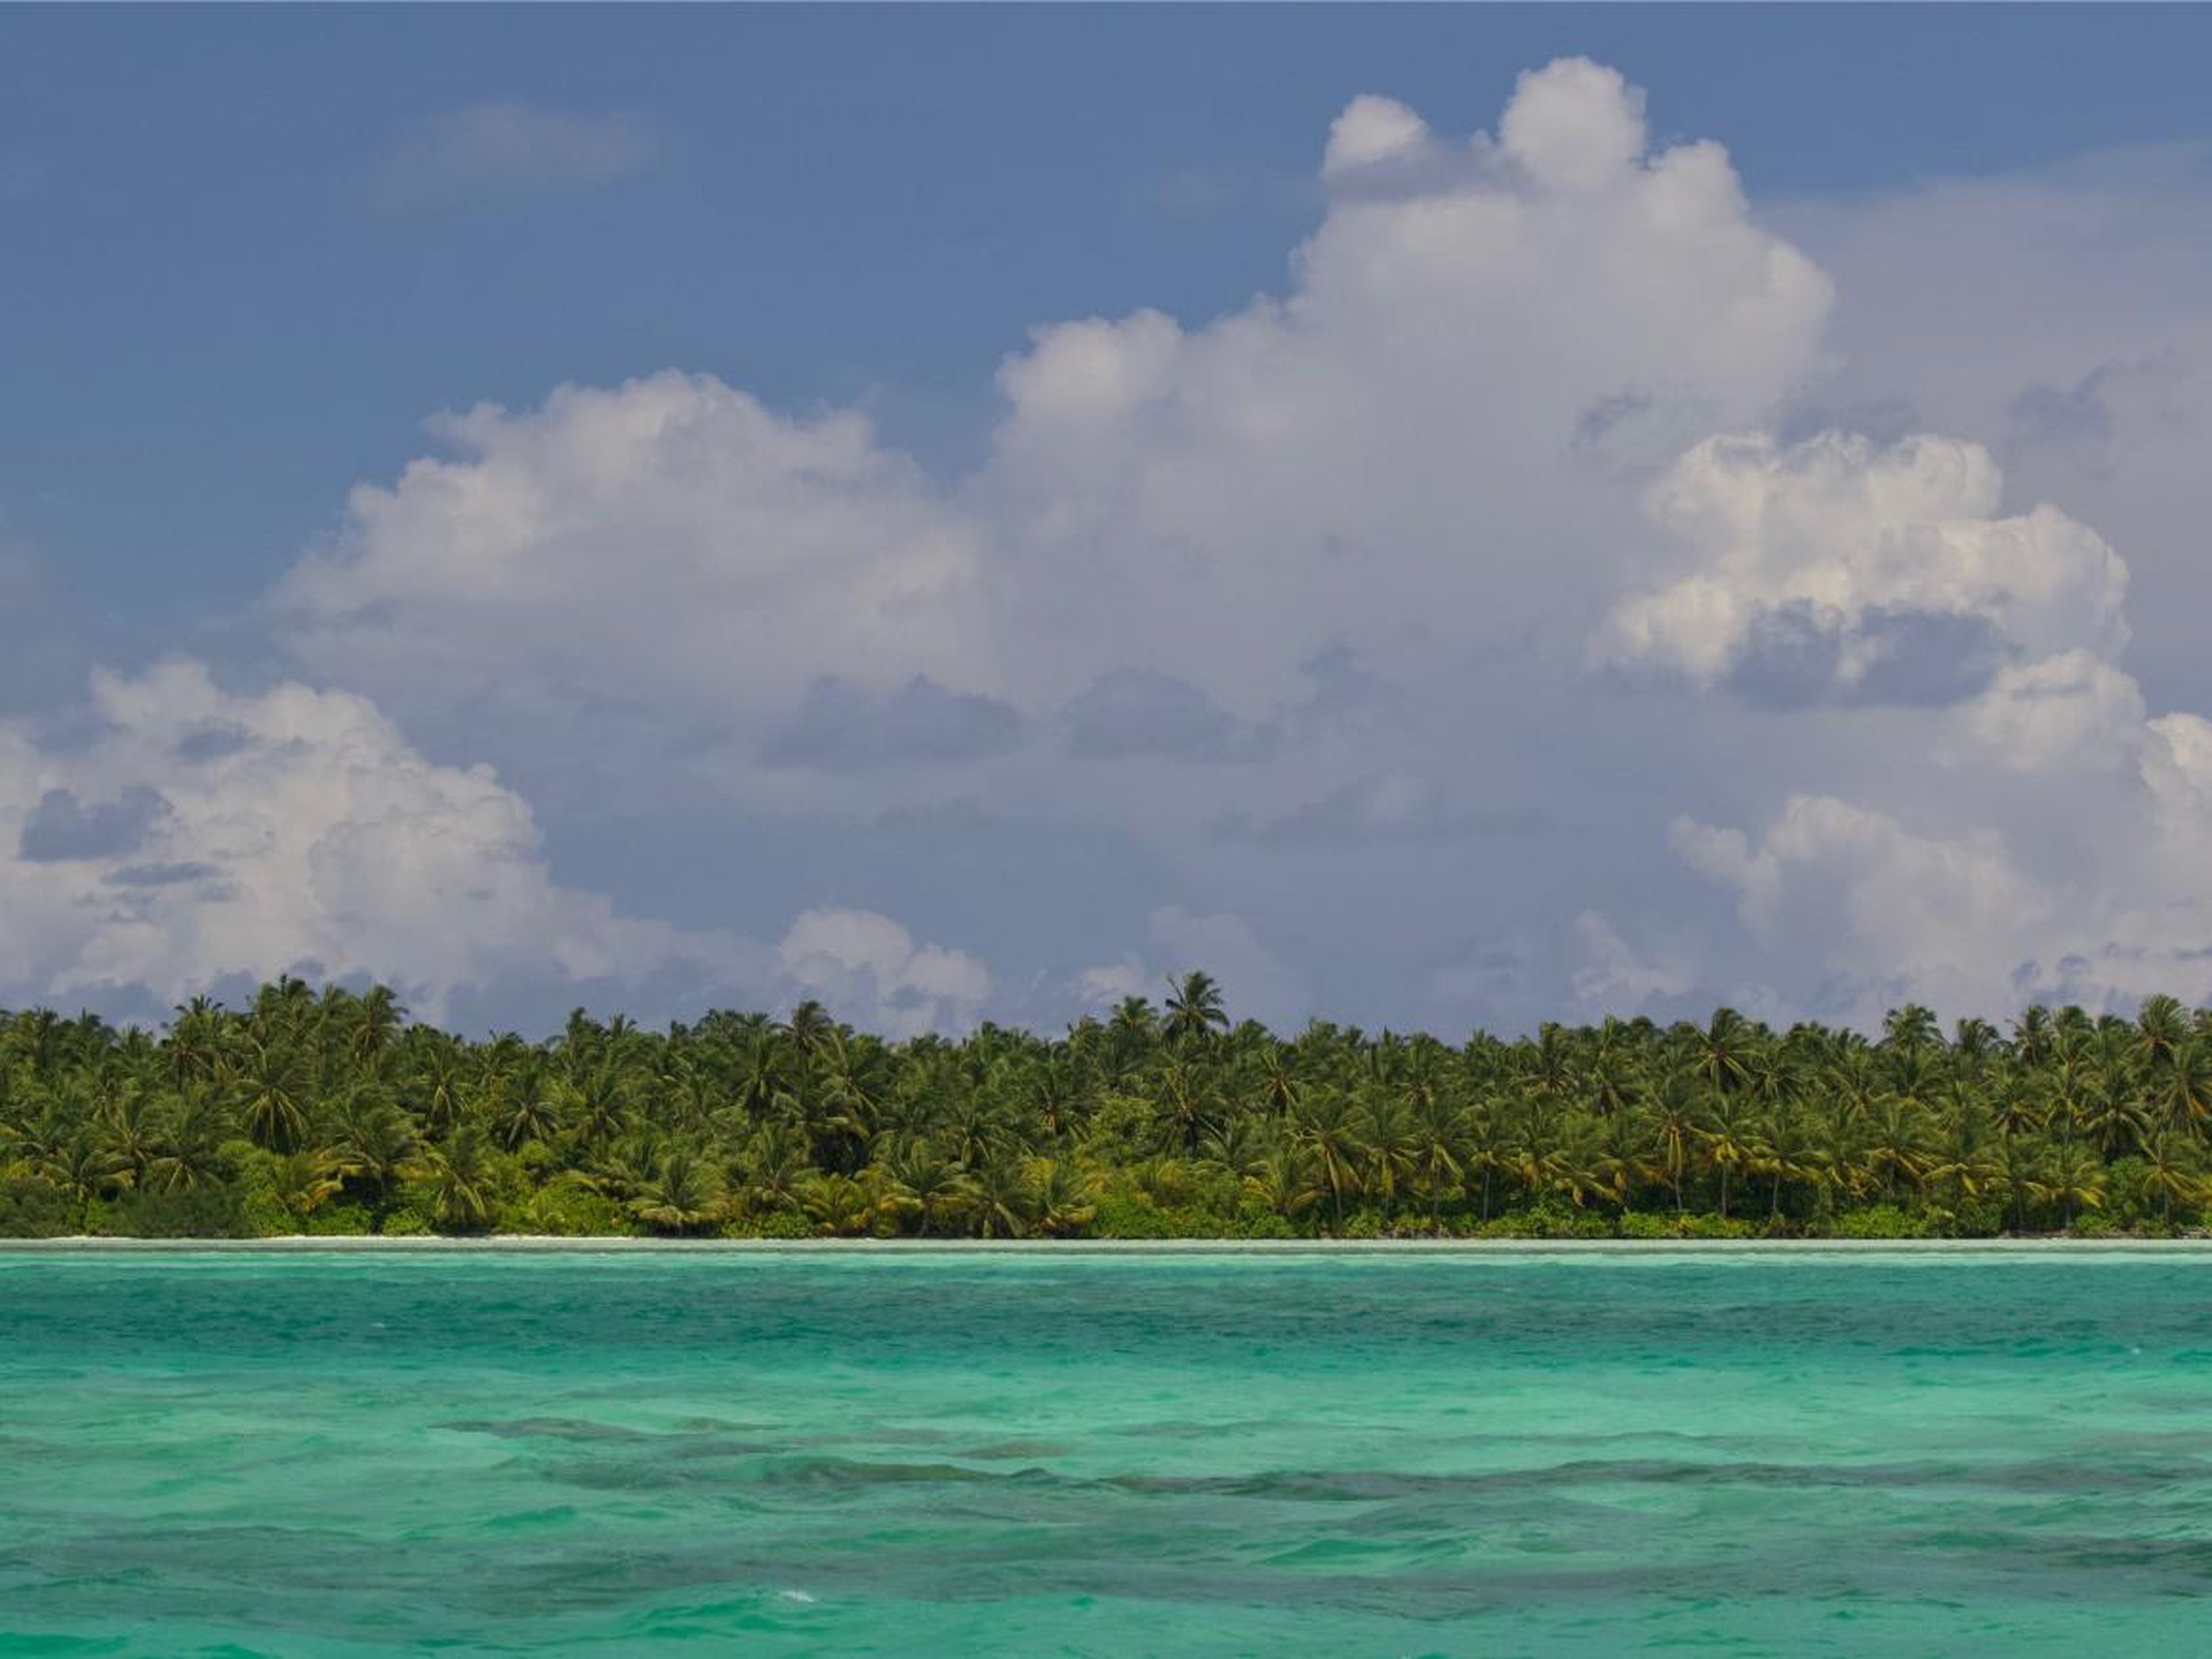 Laamu Atoll in the Maldives may remind you of "Rogue One."